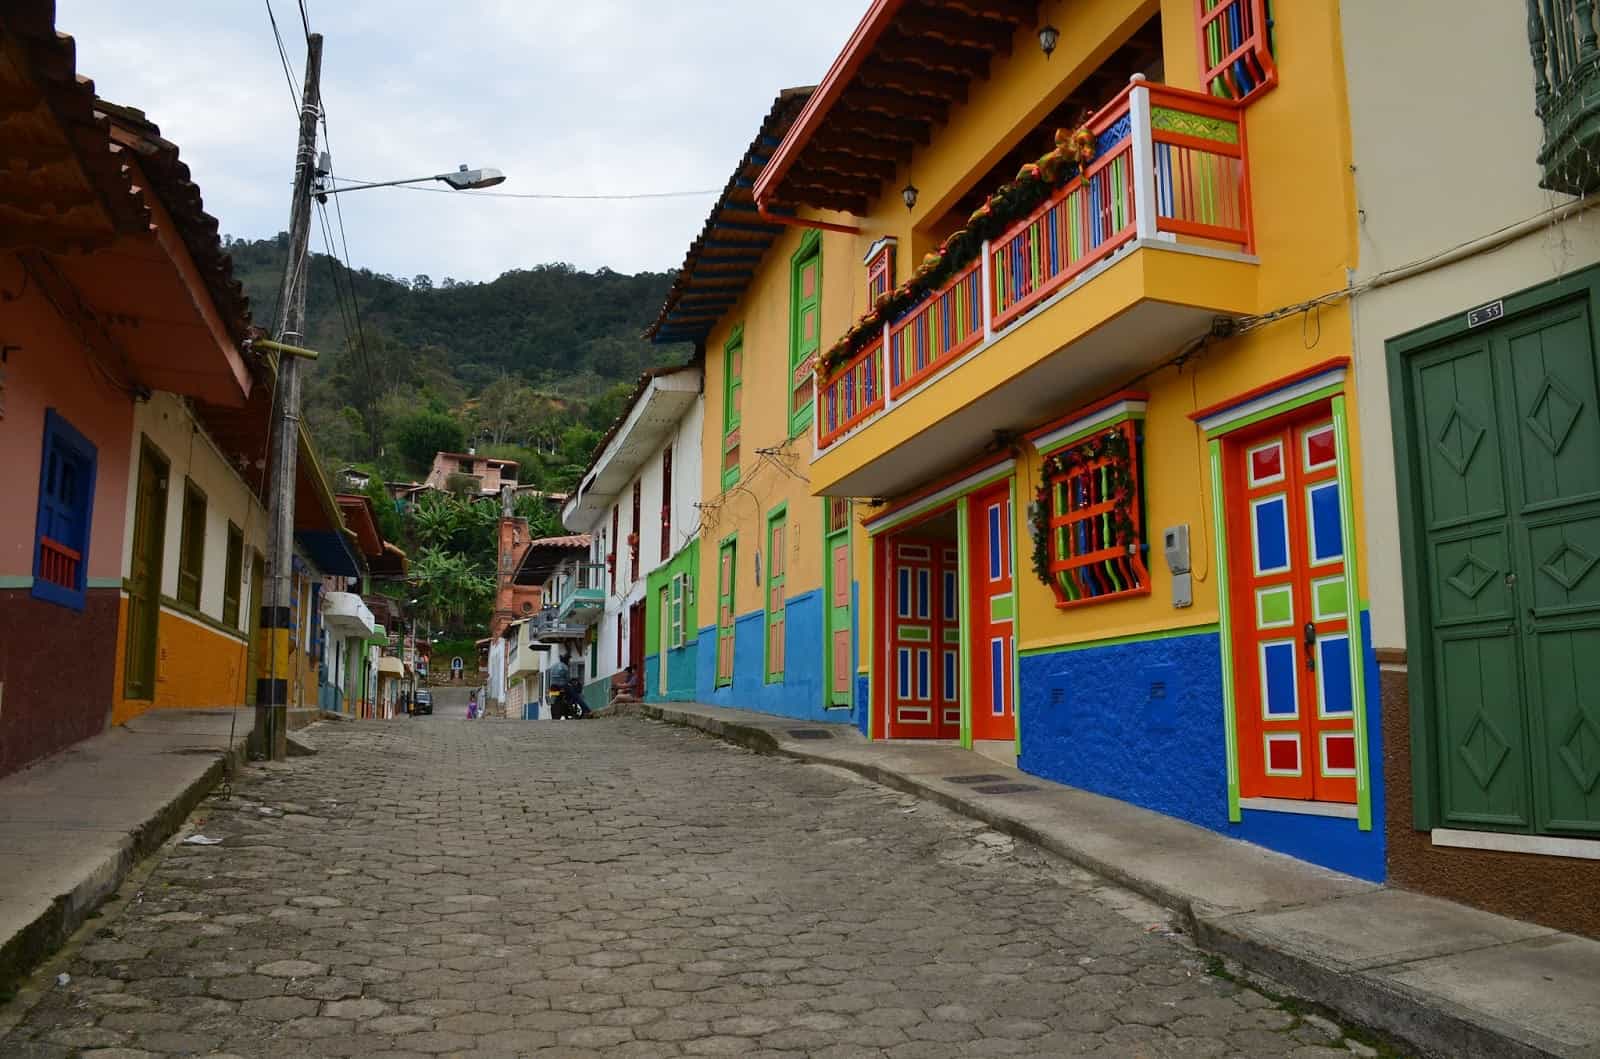 A colorful street in Jericó, Antioquia, Colombia